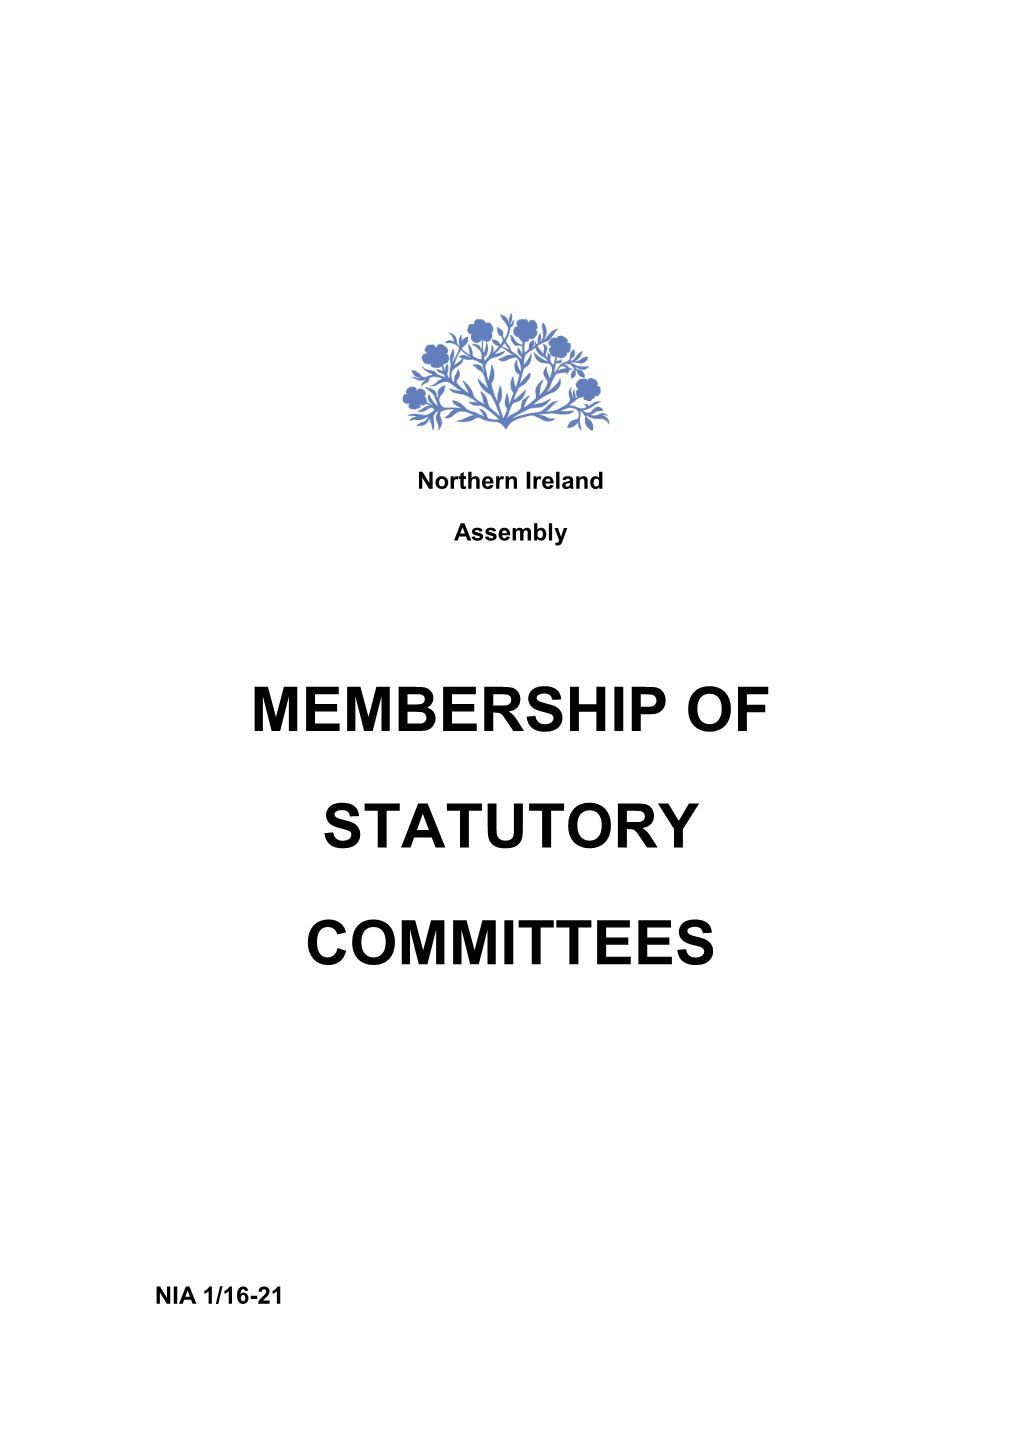 Committees of the Northern Ireland Assembly, 2016